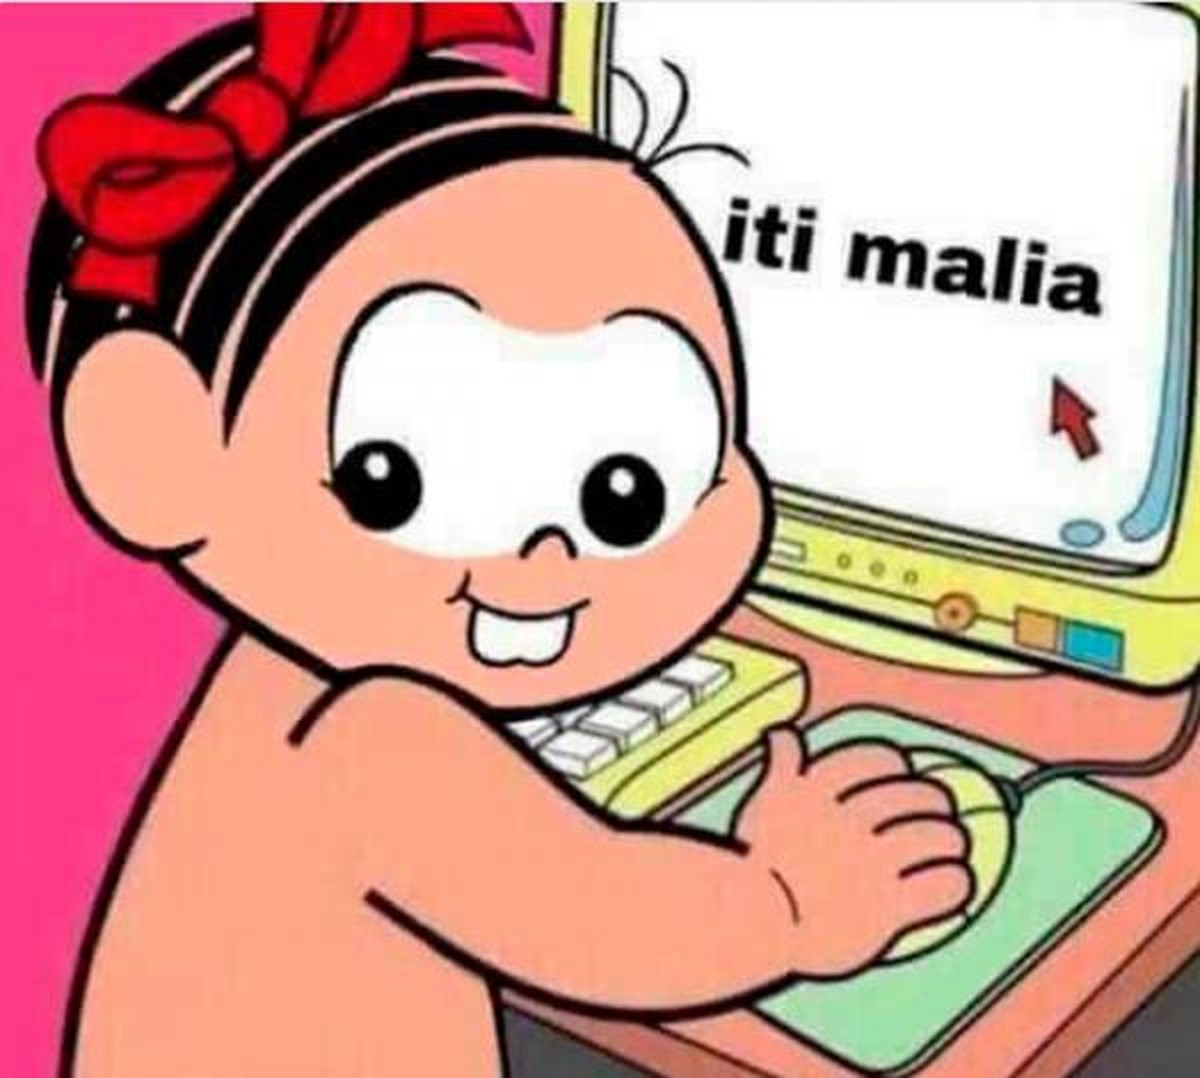 What 'iti malia'? Discover the meaning and origin of the meme | Internet